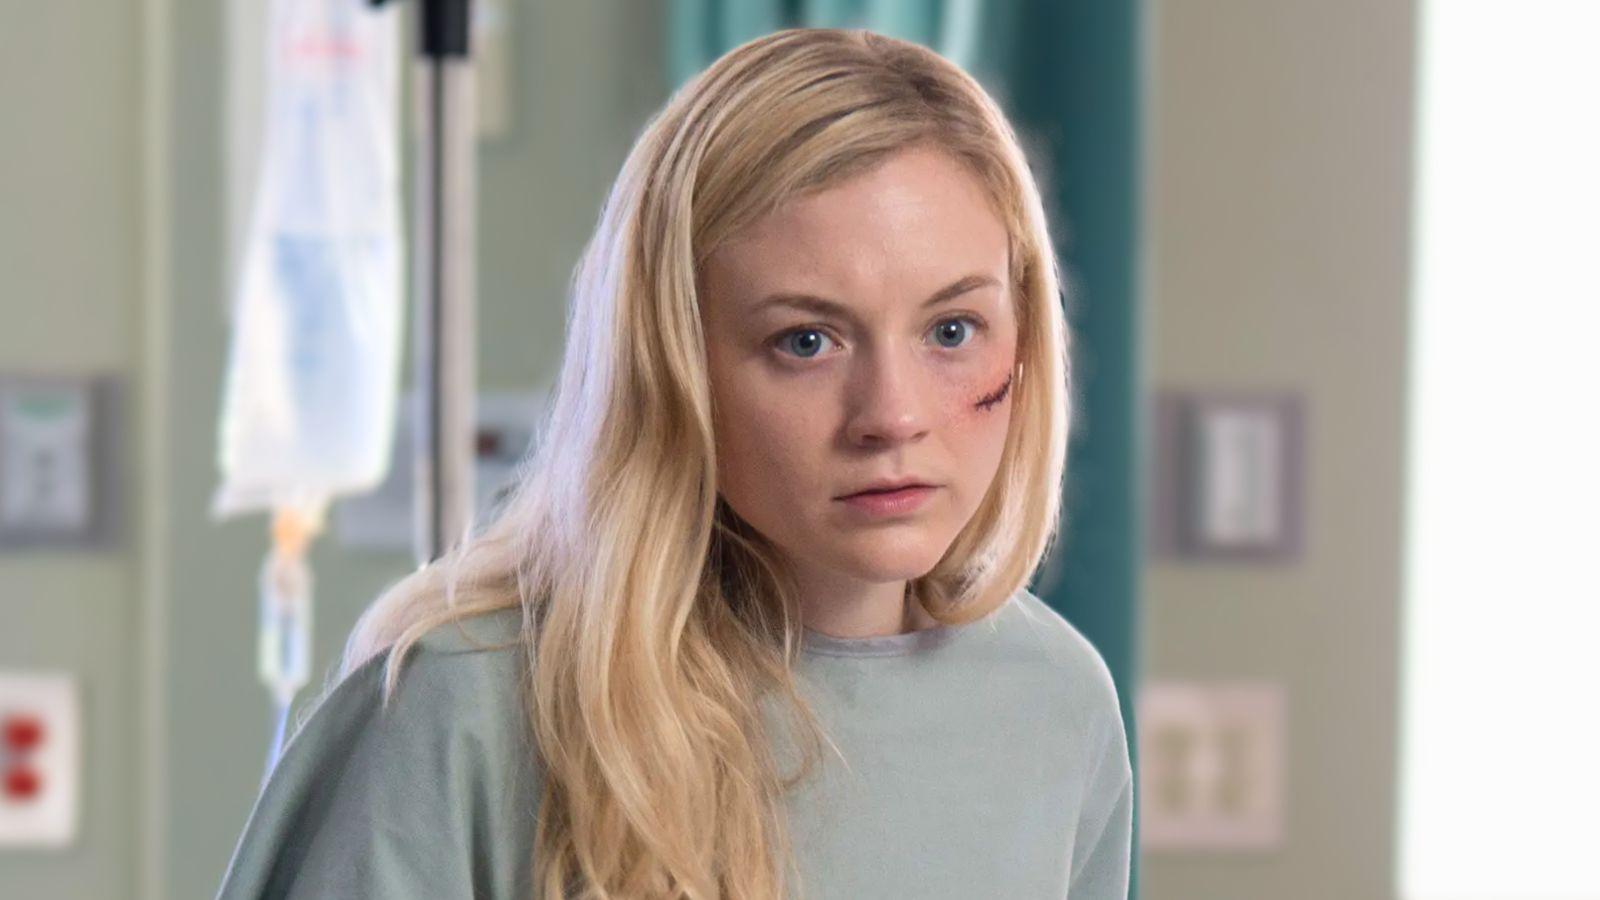 Beth Greene stands in a hospital room wearing a gown in The Walking Dead season 5 episode 8. She has a large cut on the side of her face.